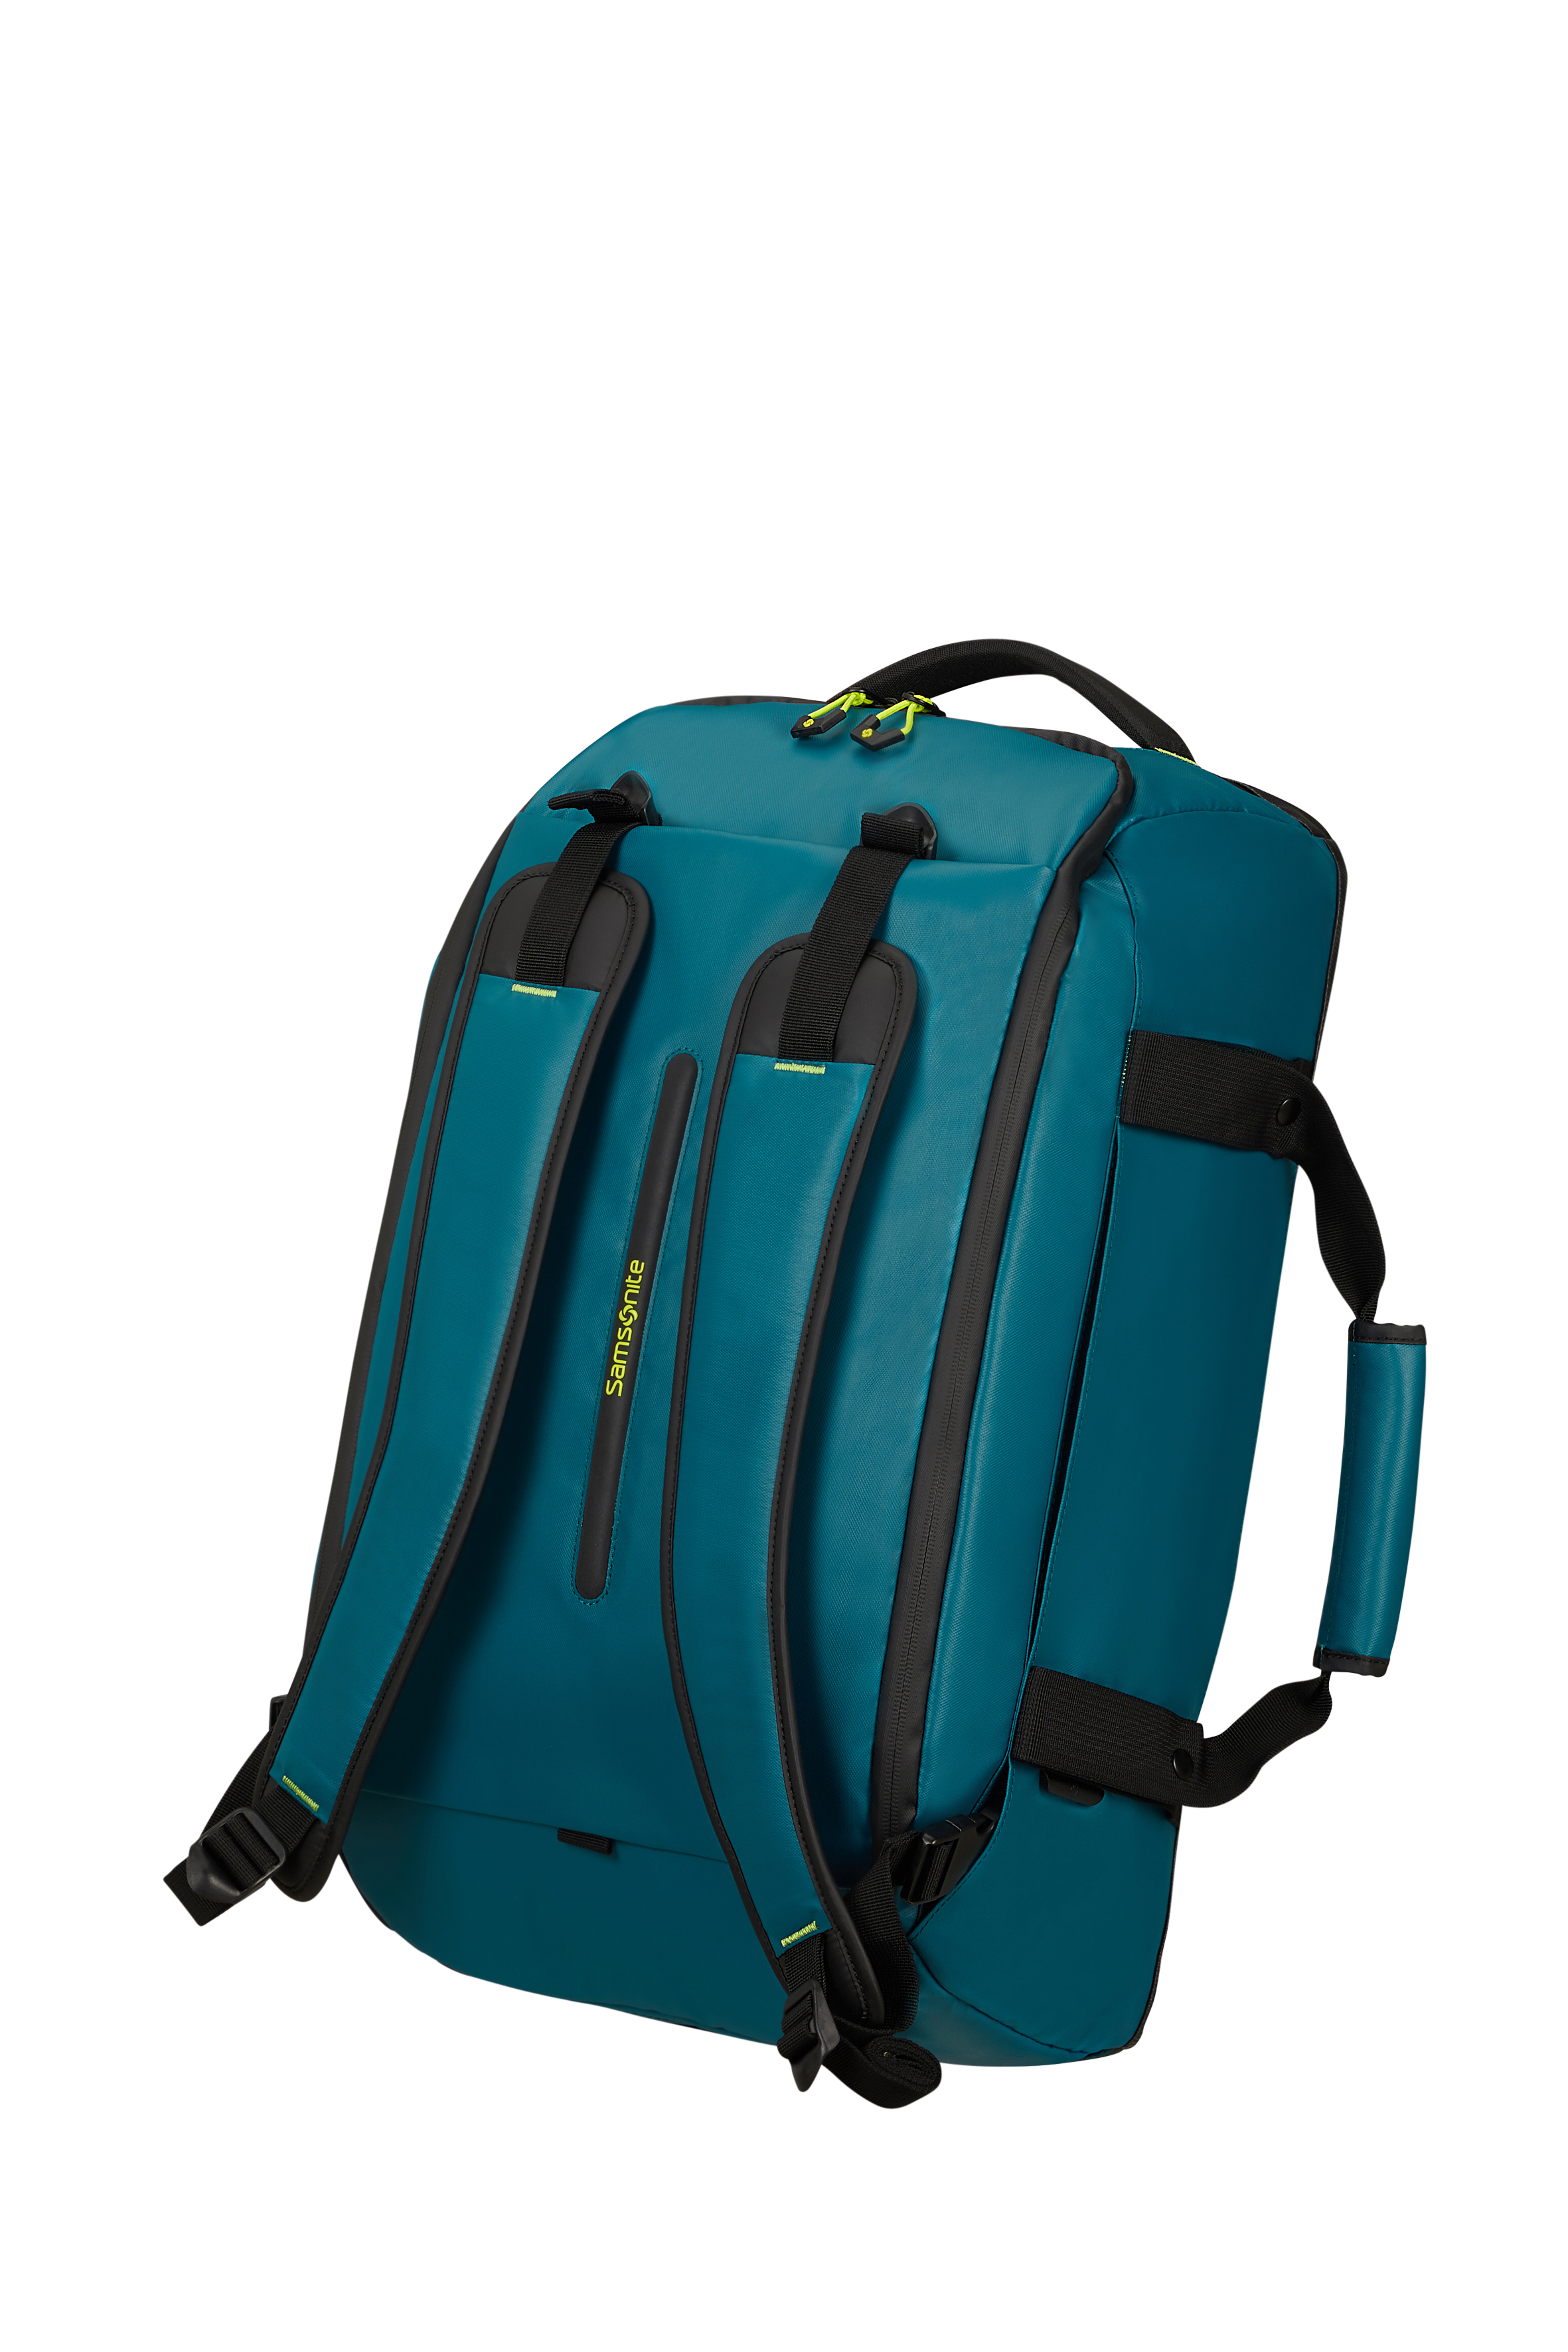 ECODIVER DUFFLE S PETROL BLUE/LIME